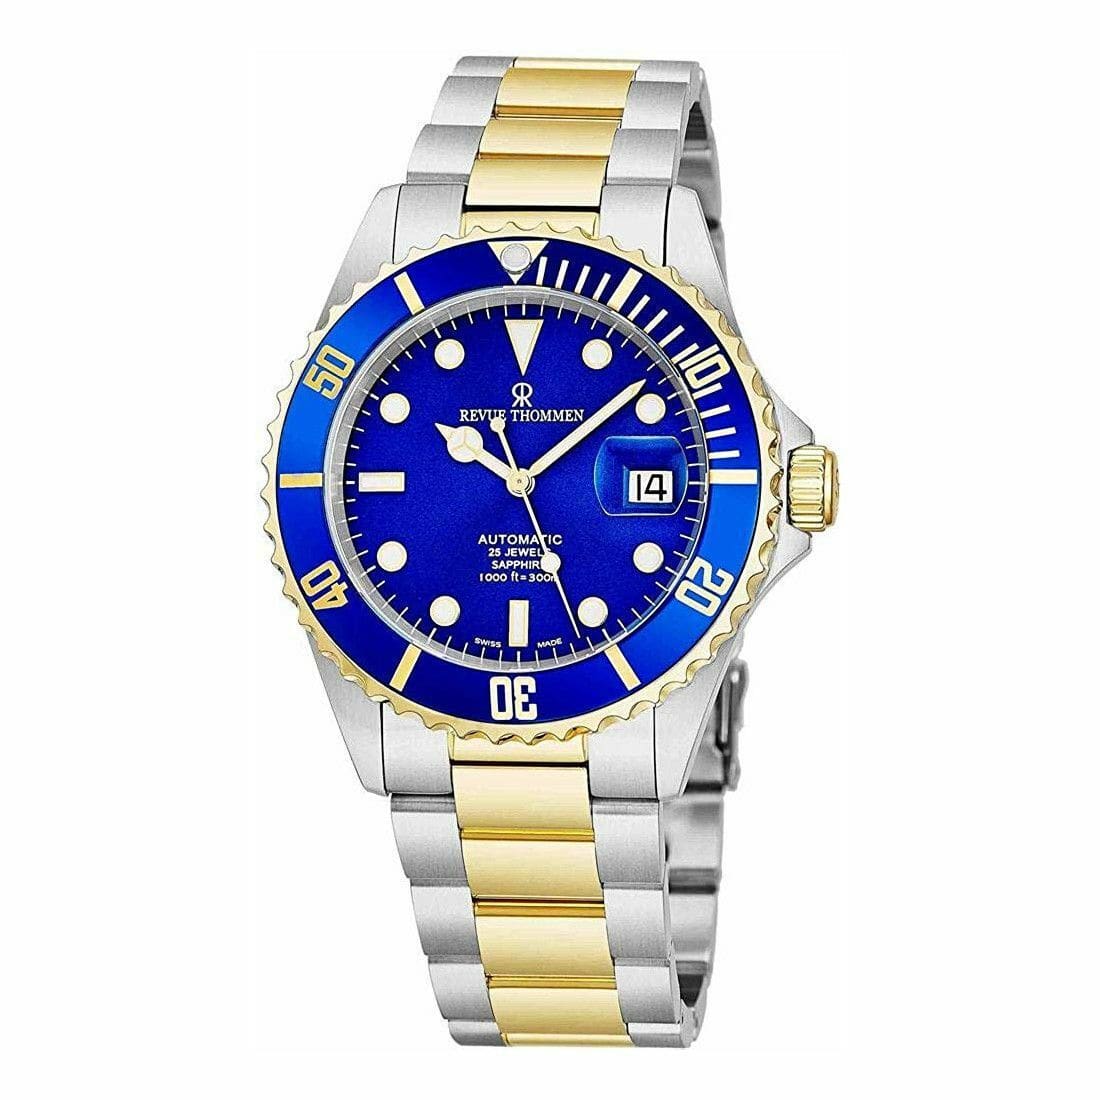 Revue Thommen 17571.2145 Diver Blue Dial Two Tone Stainless Steel Swiss Automatic Watch 794504312645